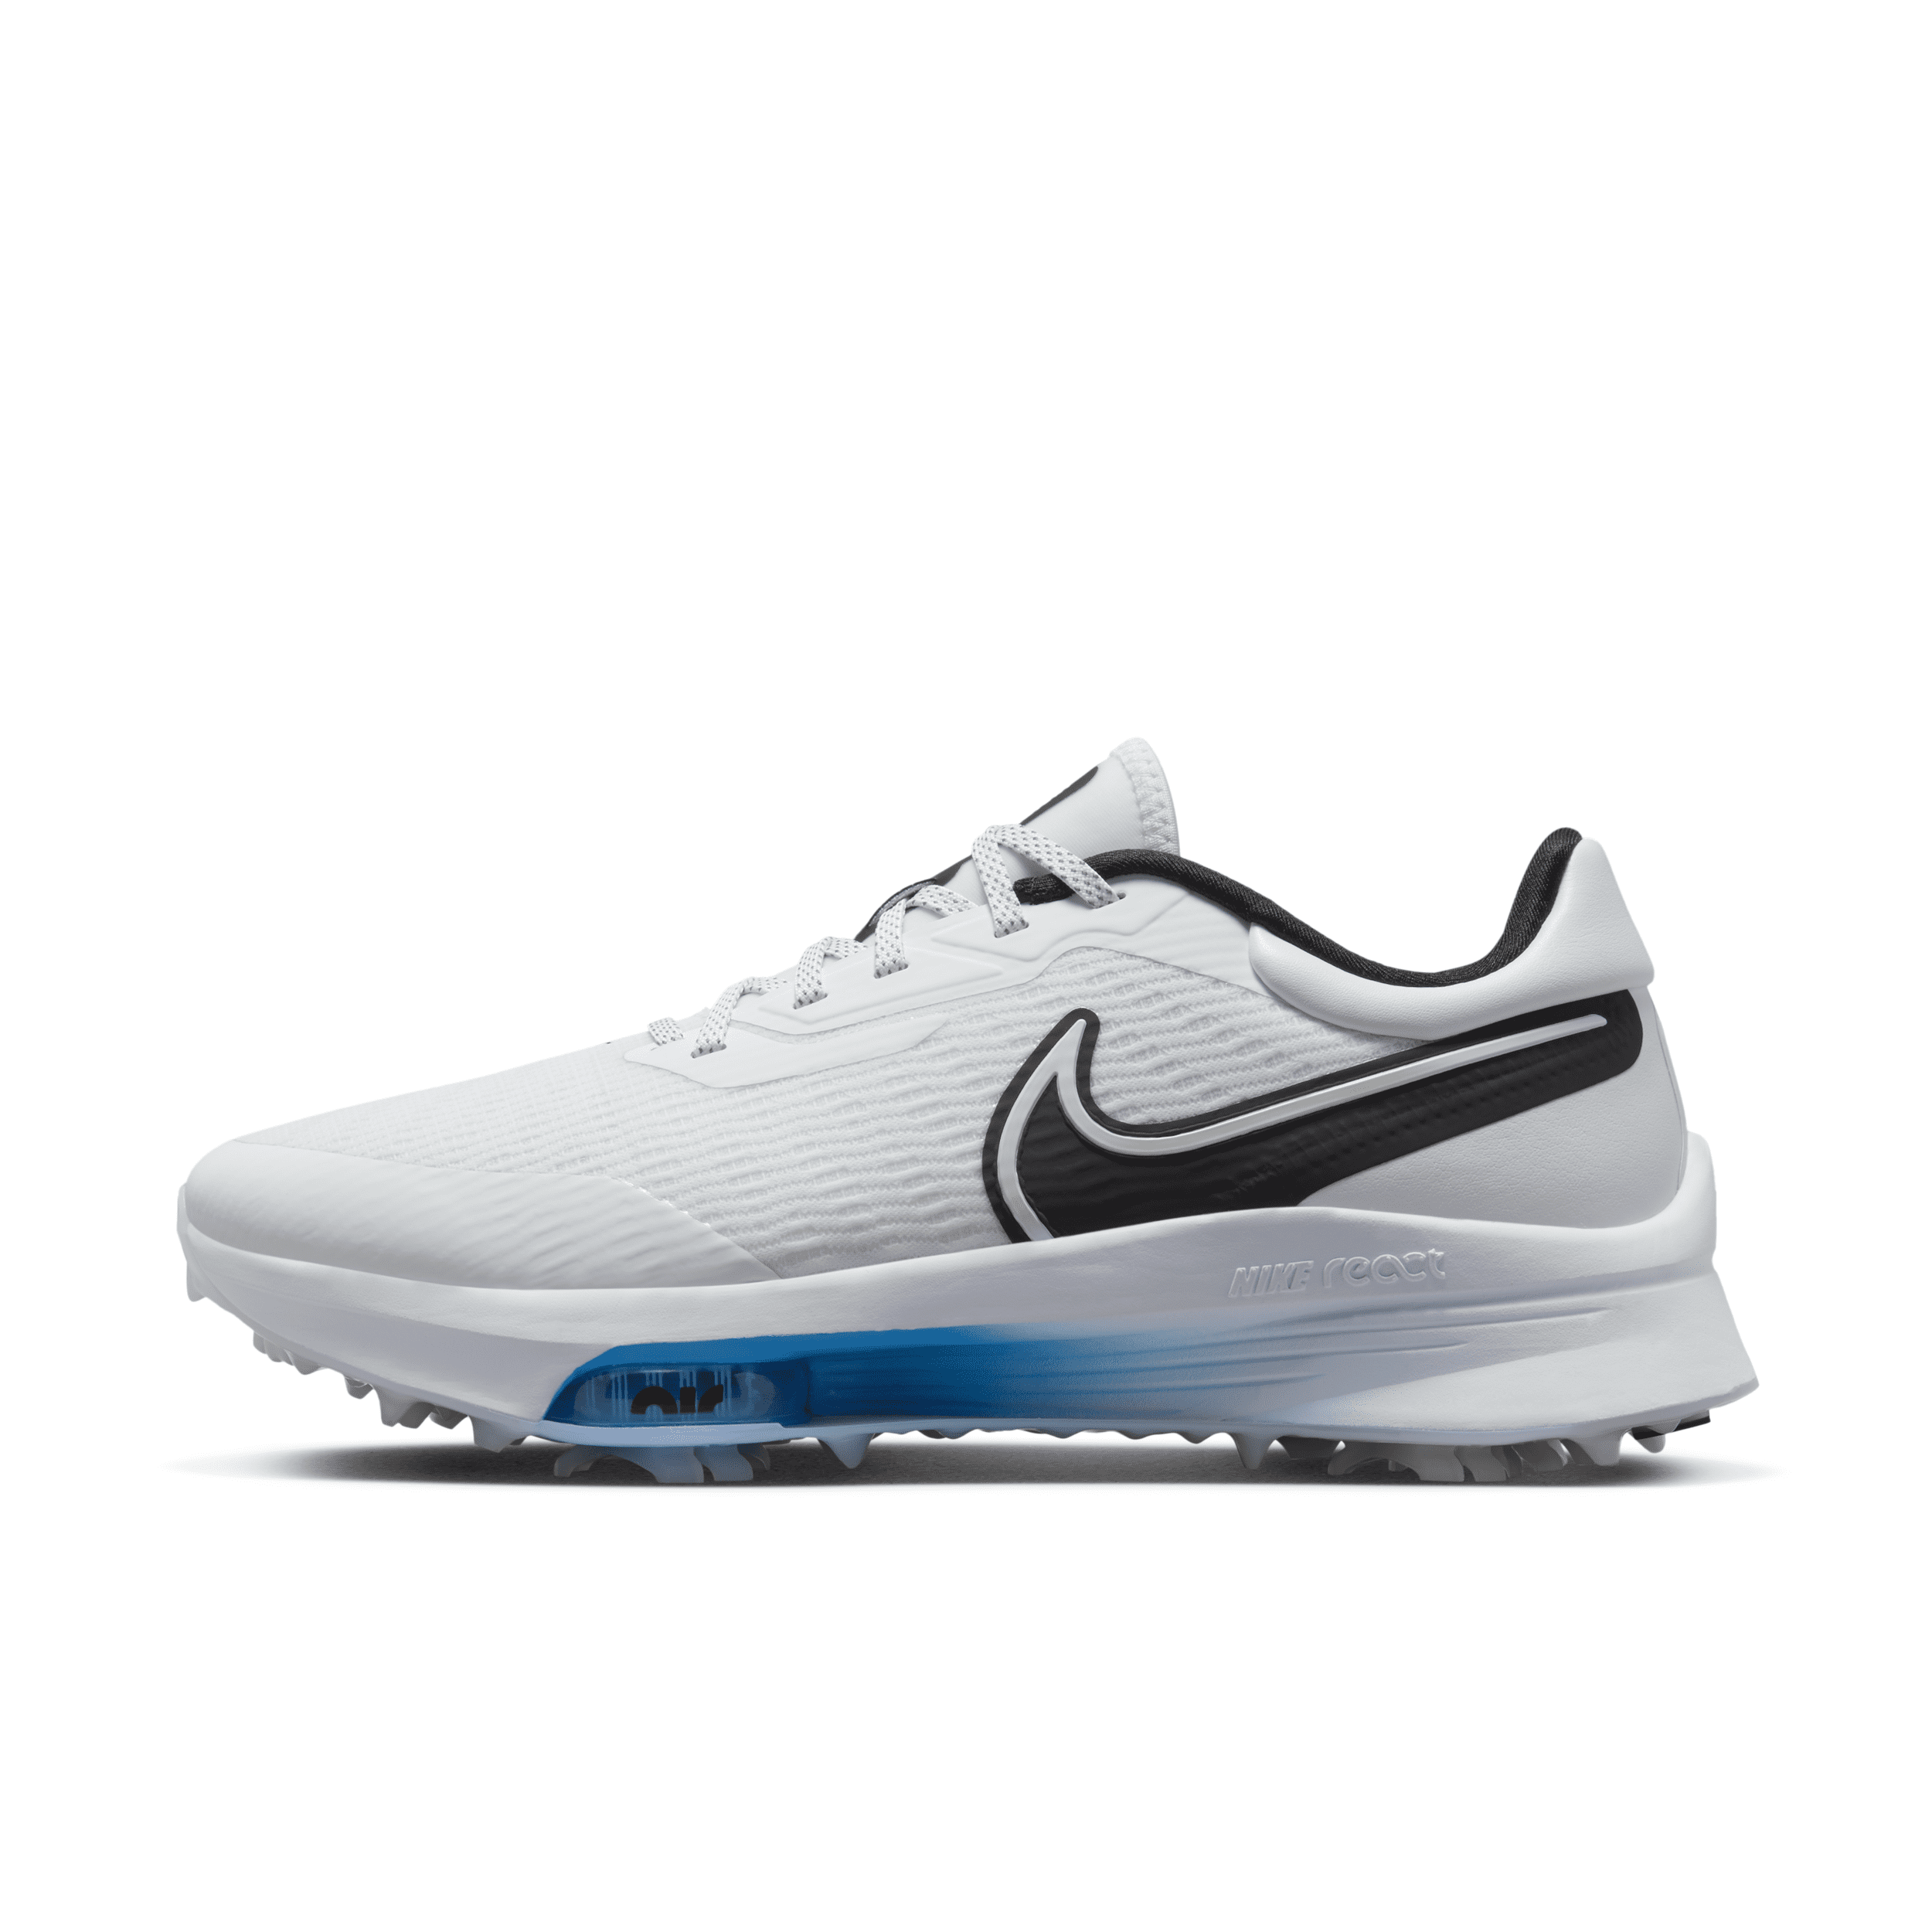 NIKE MEN'S AIR ZOOM INFINITY TOUR GOLF SHOES,1003334596